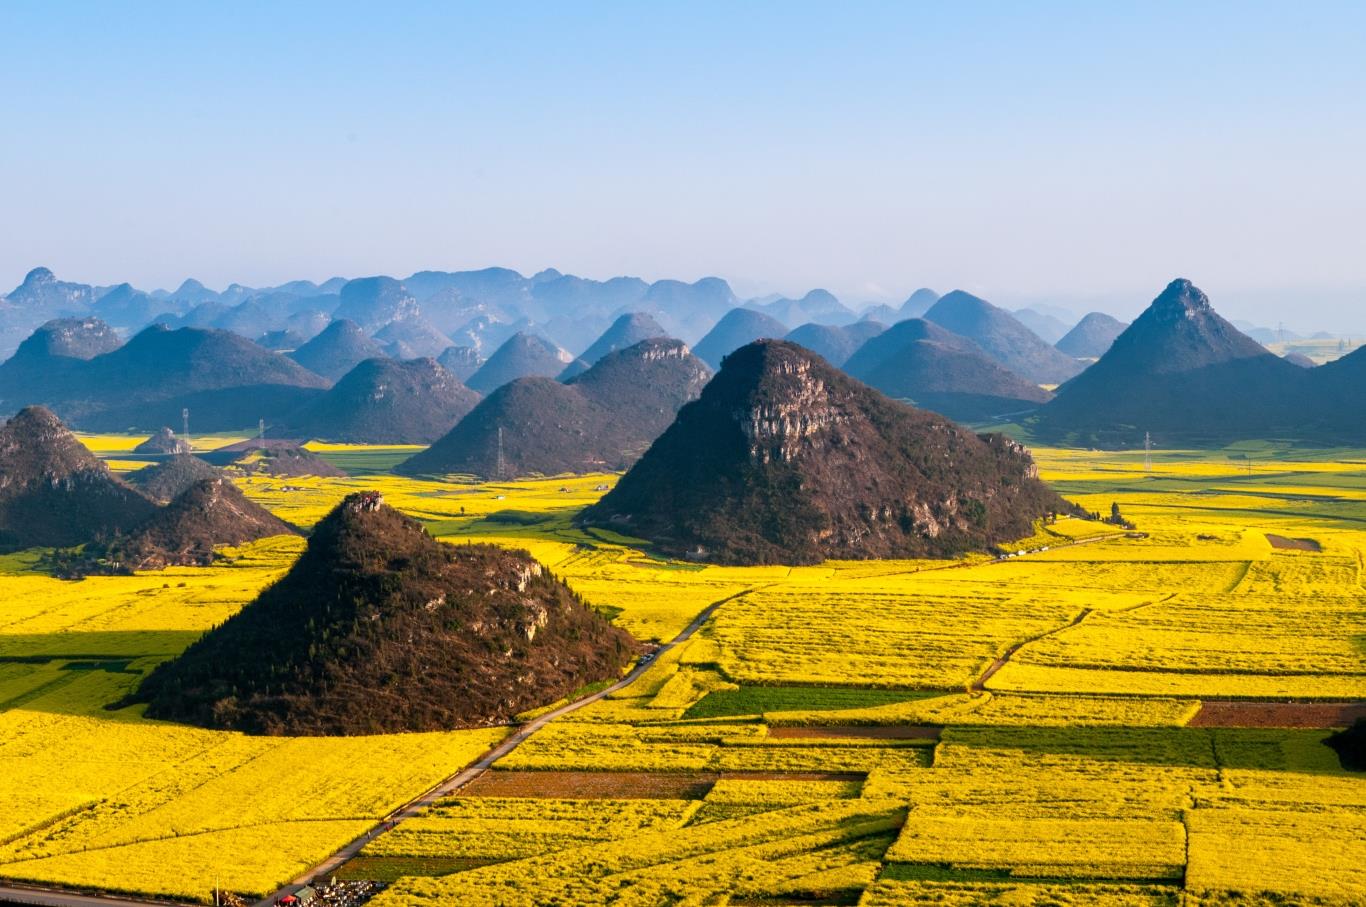 The beauty of Luoping canola flower garden - a mecca for photographers...